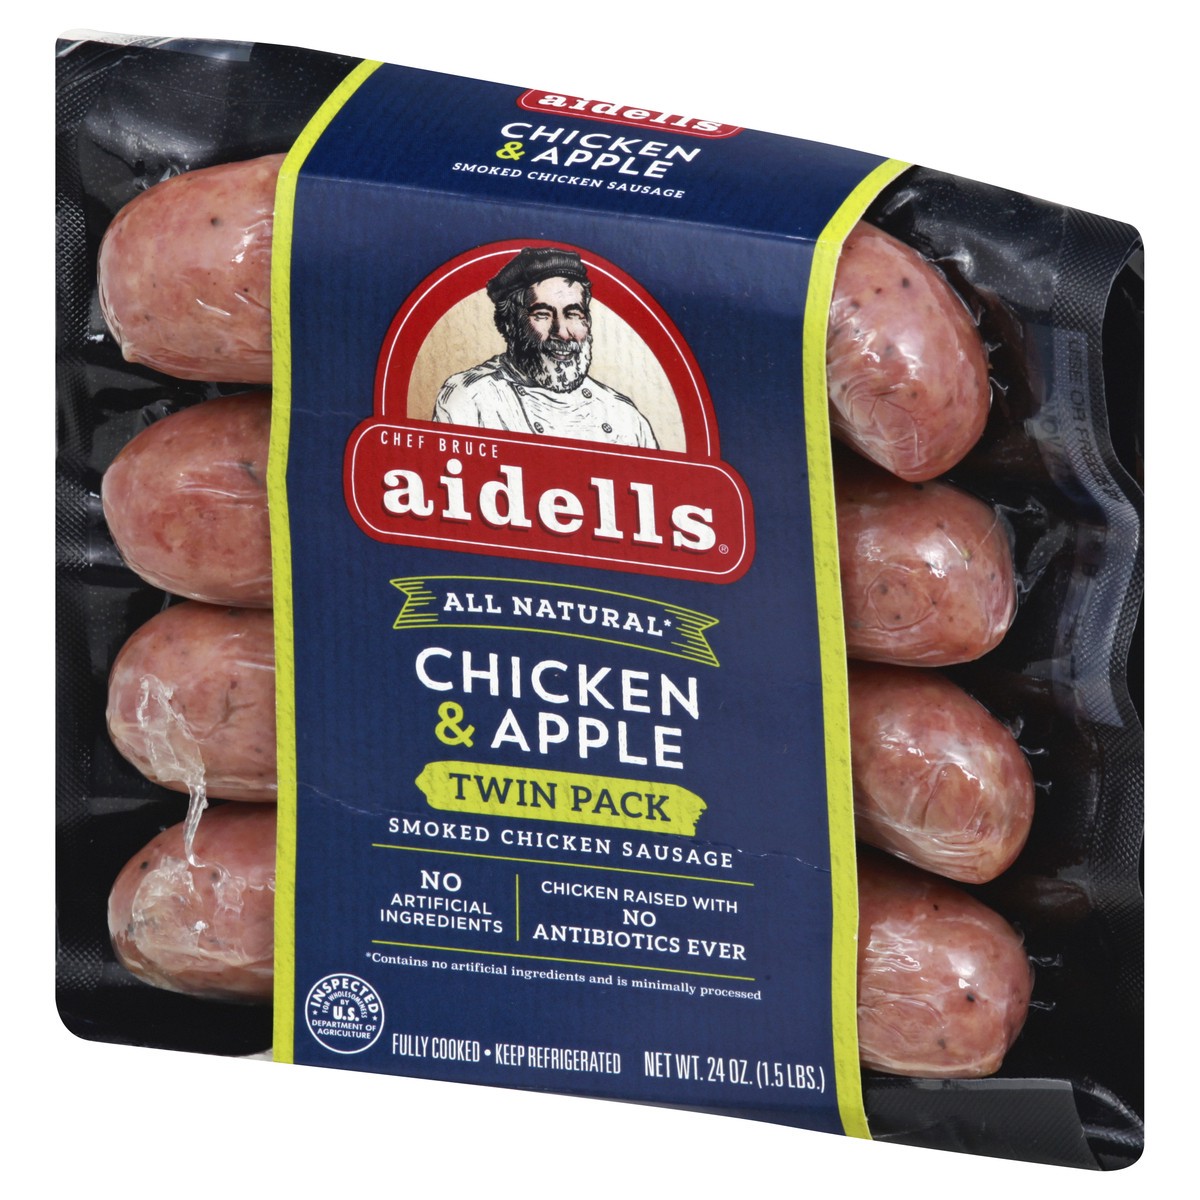 slide 2 of 10, Aidells Smoked Chicken Sausage, Chicken & Apple, Twin Pack, 24 oz. (8 Fully Cooked Links), 24 oz